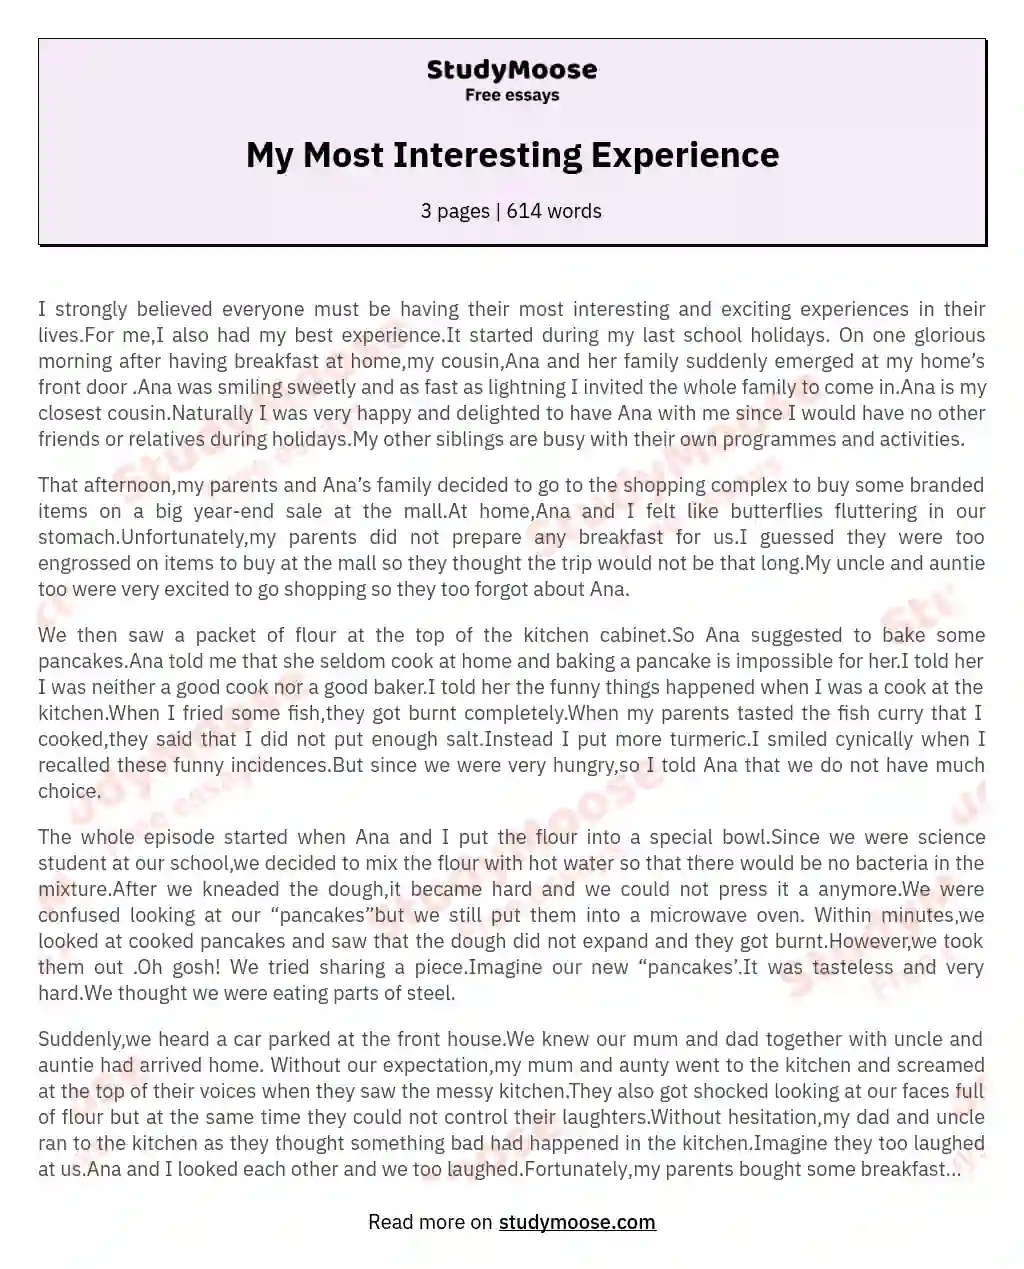 My Most Interesting Experience essay